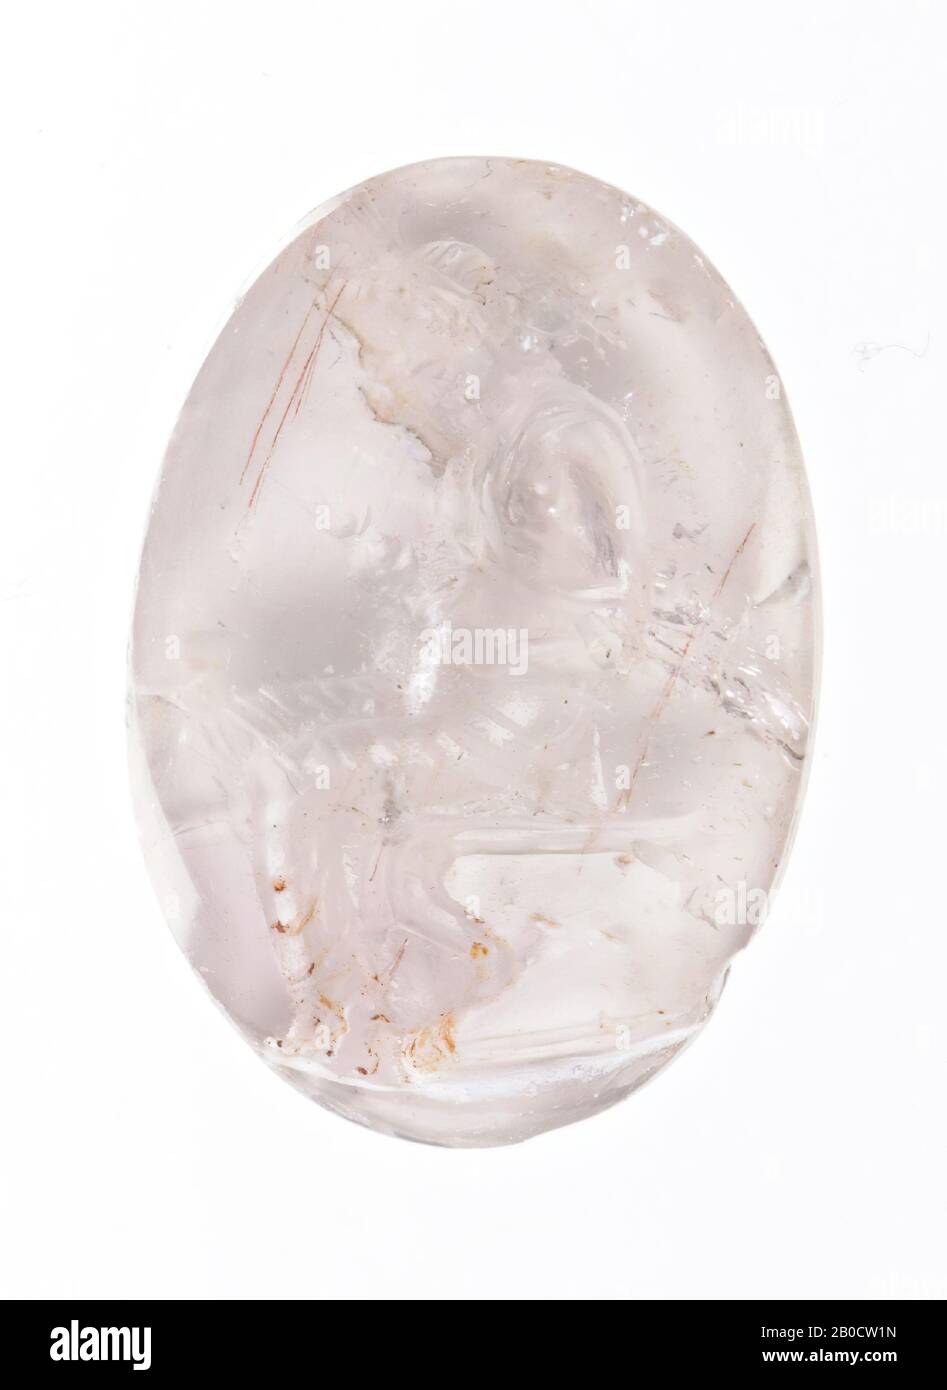 Vz: the goddess is dressed in a chiton and wears a lotus flower fastened with a string to her head. She has a small Horus child on her lap, the child has small curls and carries an extensive crown., Gem, intaglio, ringstone, amethyst, Color: light purple, Shape: oval, Machined: Maaskant-Kleibrink, M., Catalog of the engraved gems in the Royal Coin Cabinet, 1978, p.60, fig.2, type 3A, obverse convex, Method: deep body modeling with very rounded drills, detailling with, 19 x 13 mm, D. 5 mm, 3rd century v. Chr. -300 Stock Photo